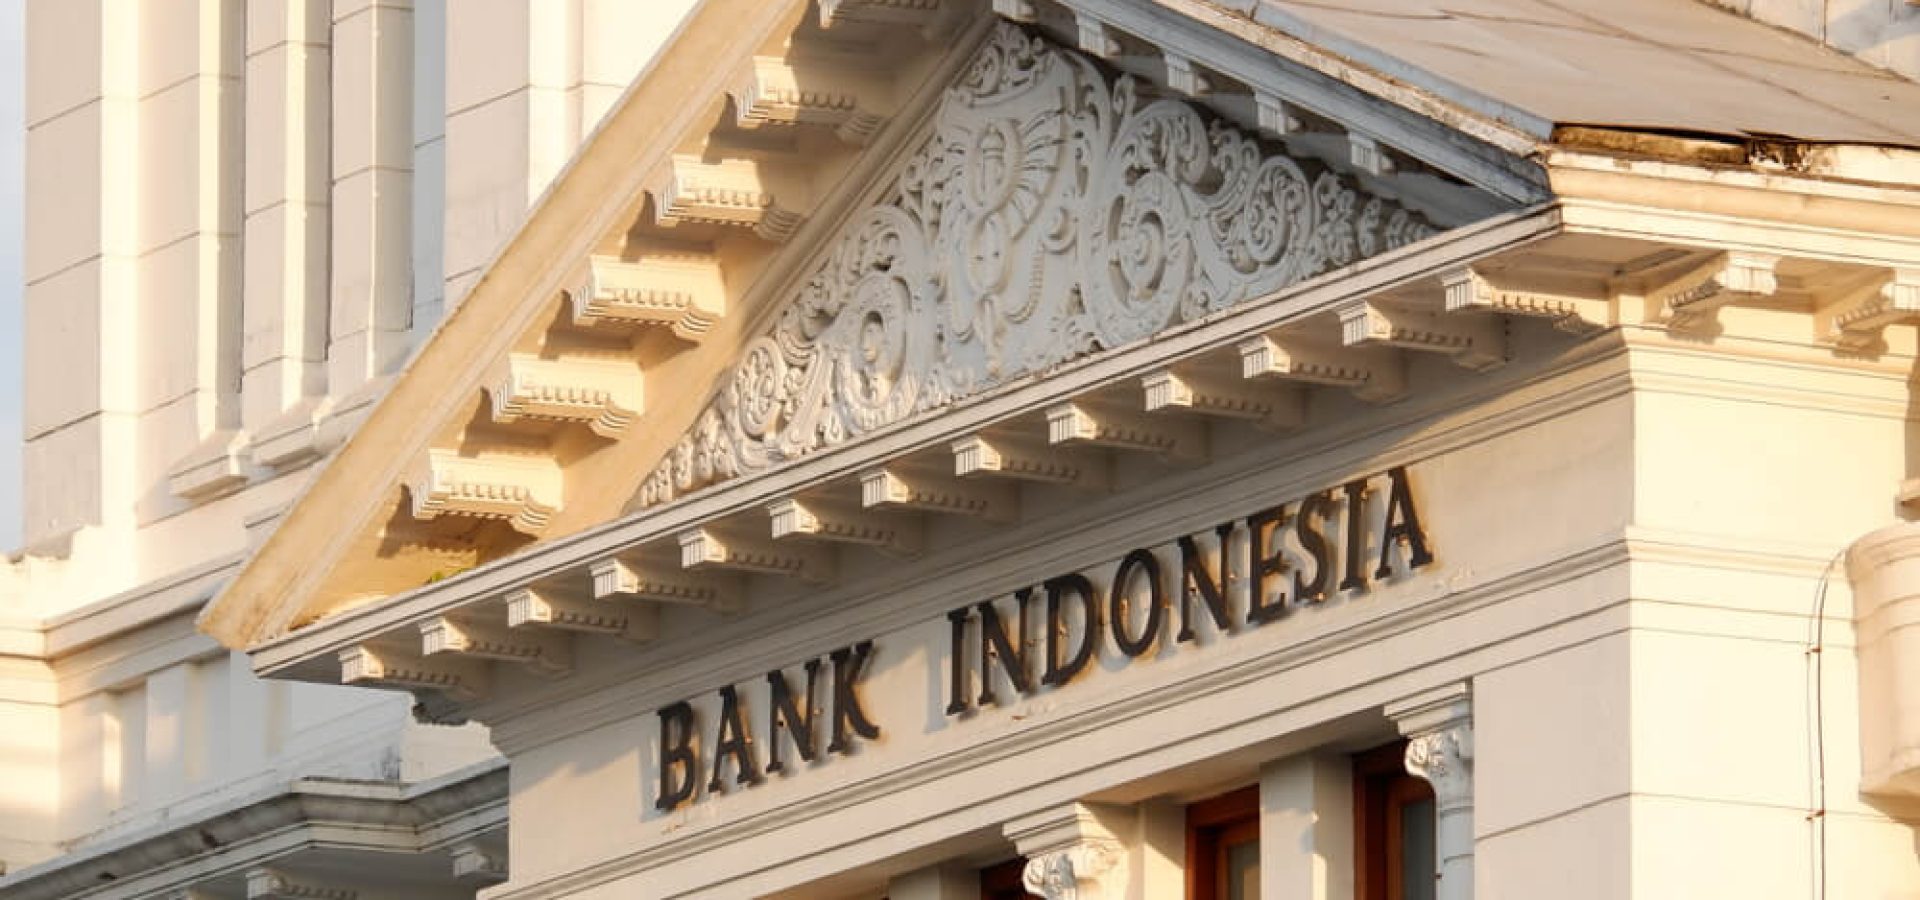 Wibest – Indonesian: the central bank of the Republic of Indonesia